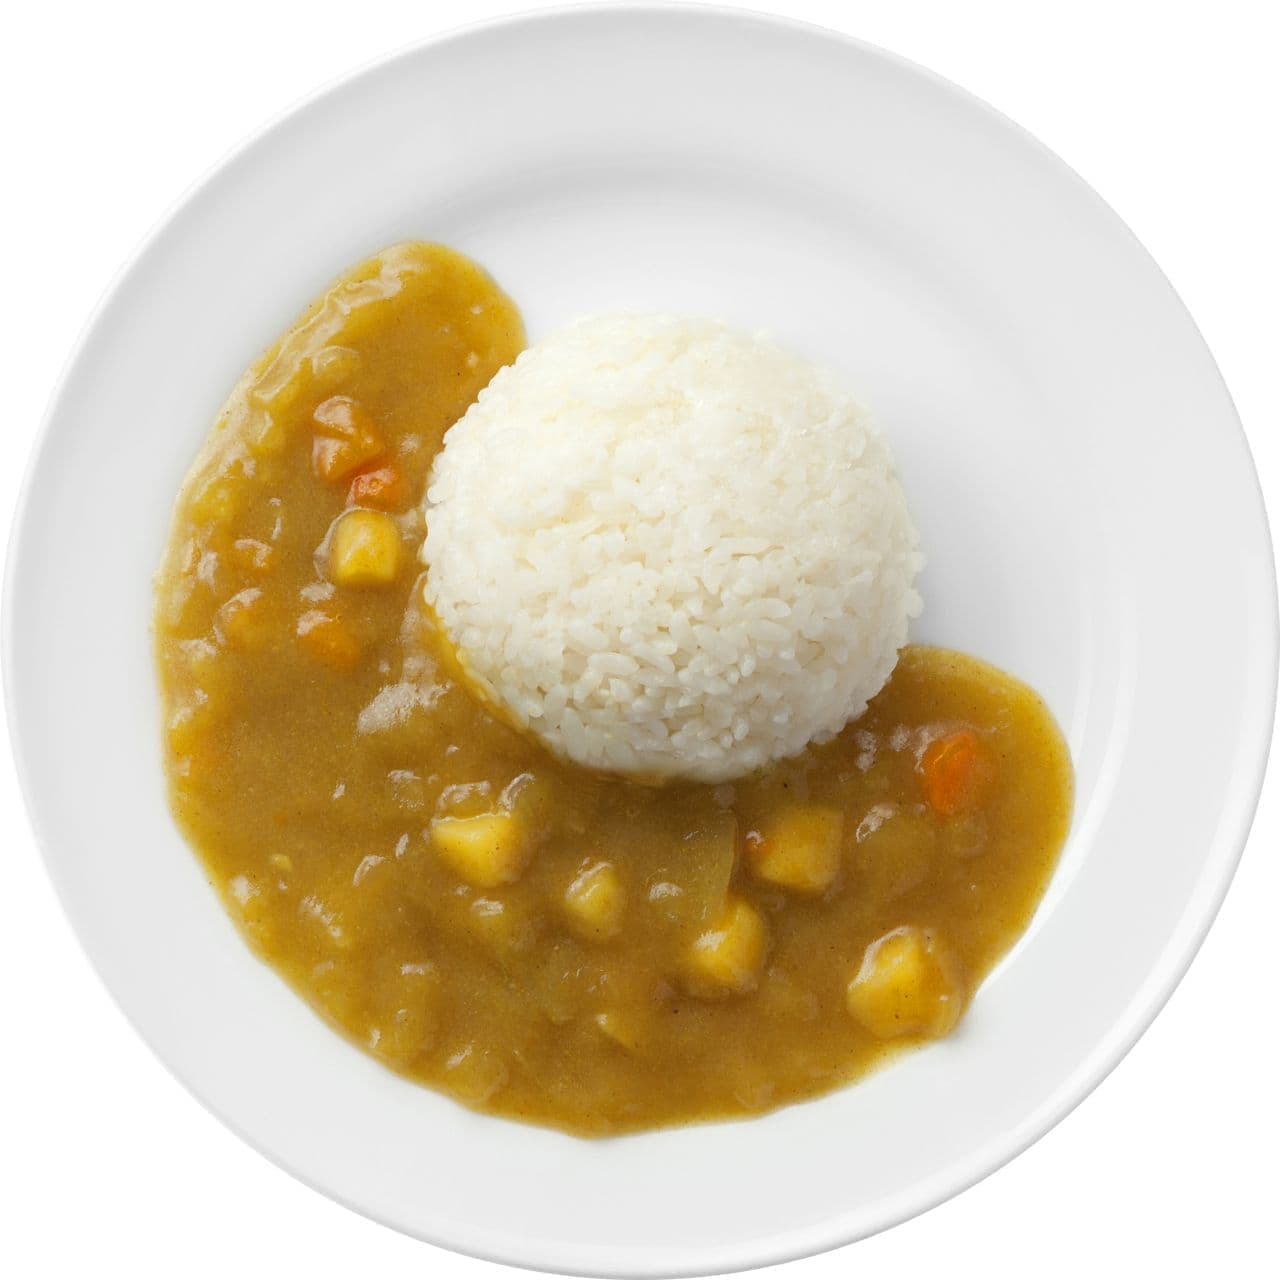 IKEA restaurant "Plant Base Kids Curry (with jelly)"